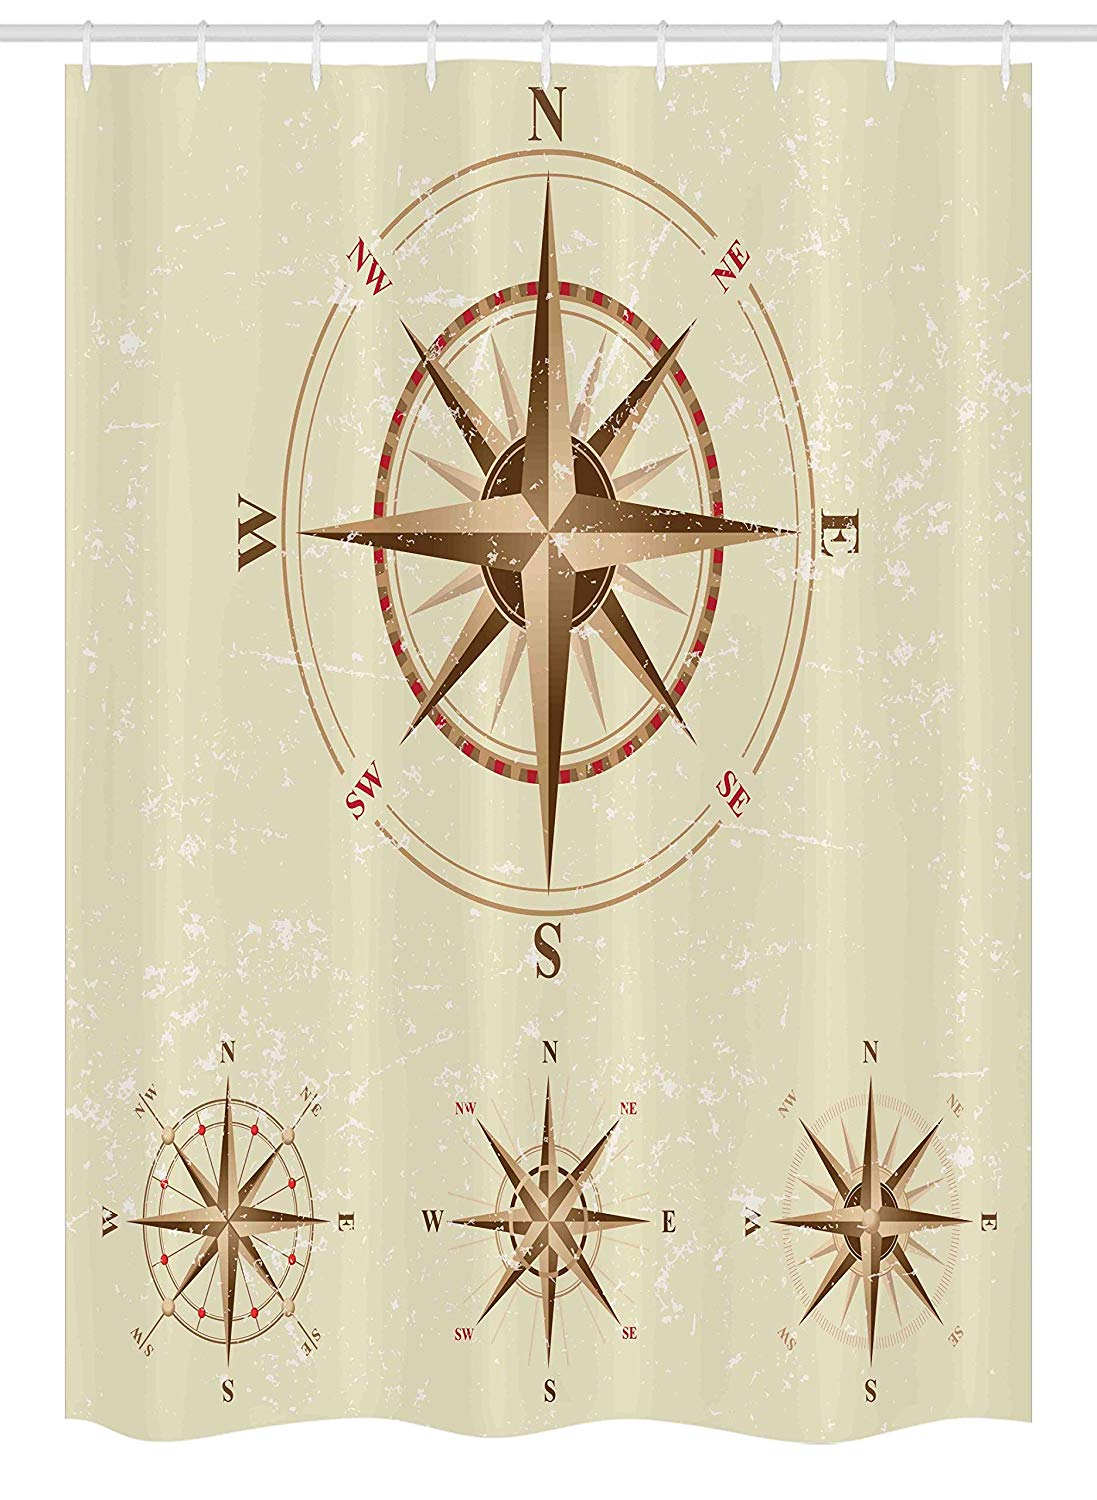 Ambesonne Compass Stall Shower Curtain, Four Different Compasses in Retro Colors Discovery Equipment Where Nautical Marine, Fabric Bathroom Decor Set with Hooks, 54 W x 78 L Inches, Beige Tan